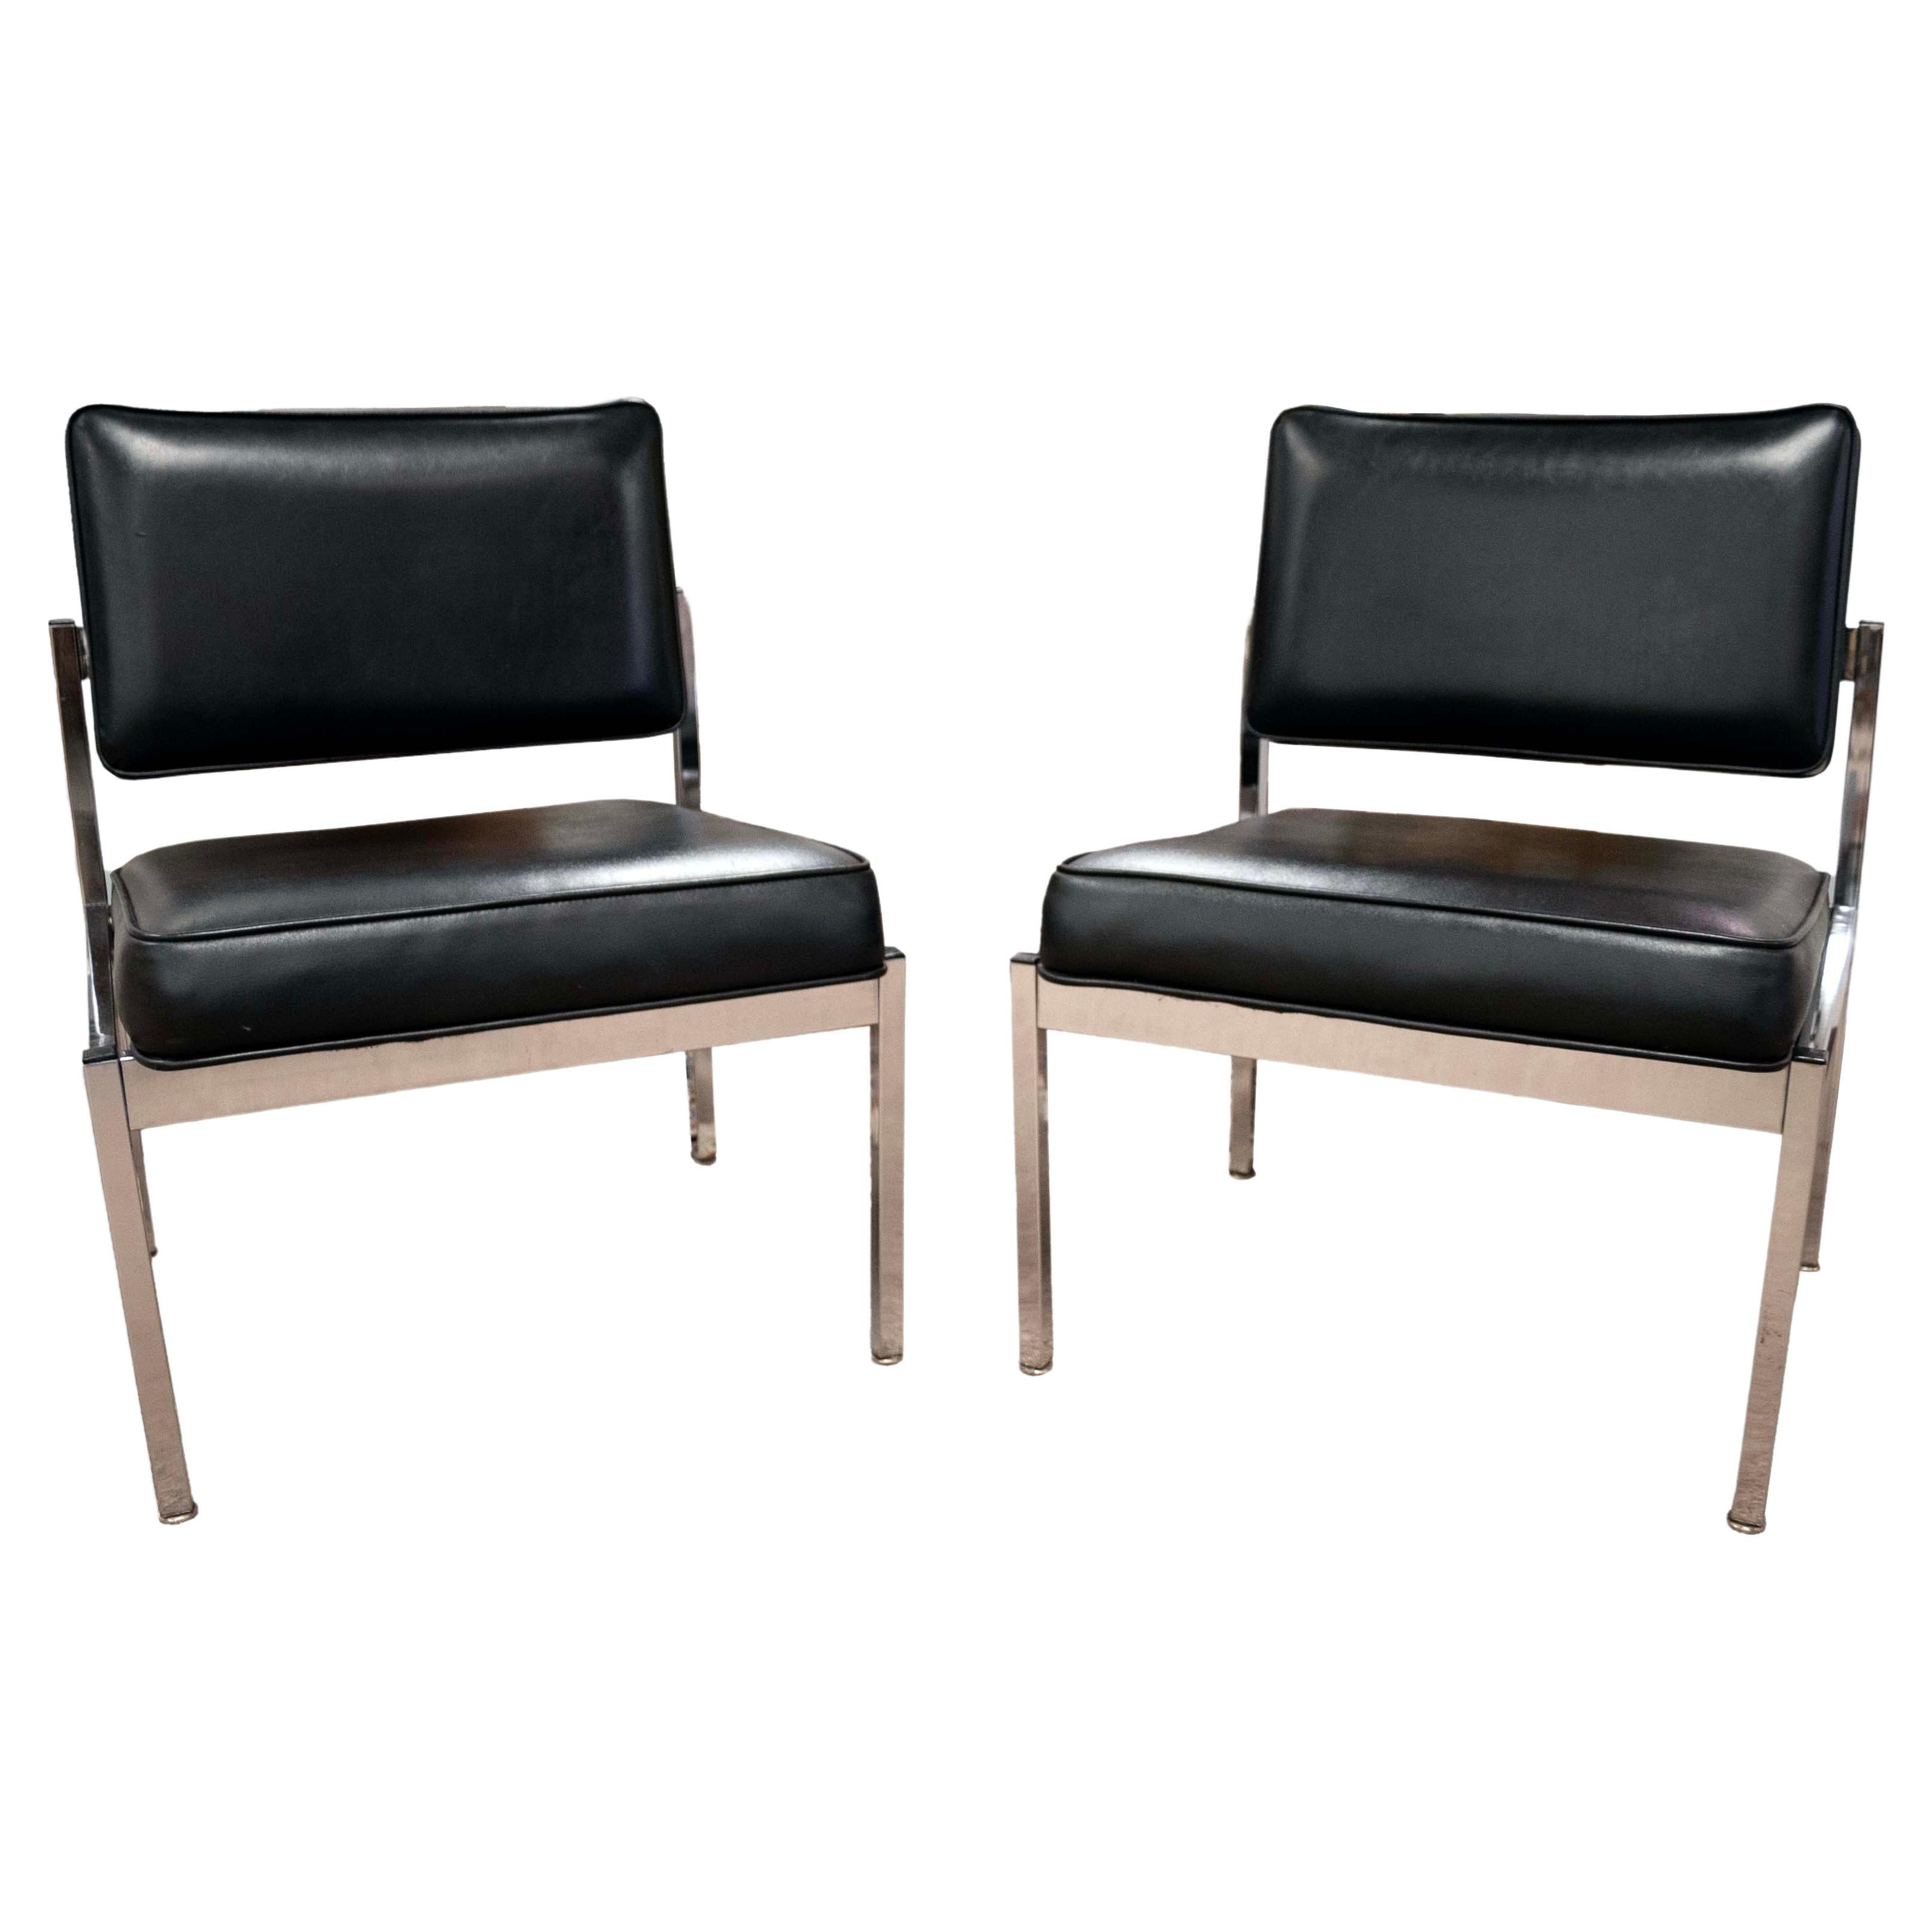 Pair of Florence Knoll Slipper Chairs in Black Leather Brushed Stainless Steel For Sale